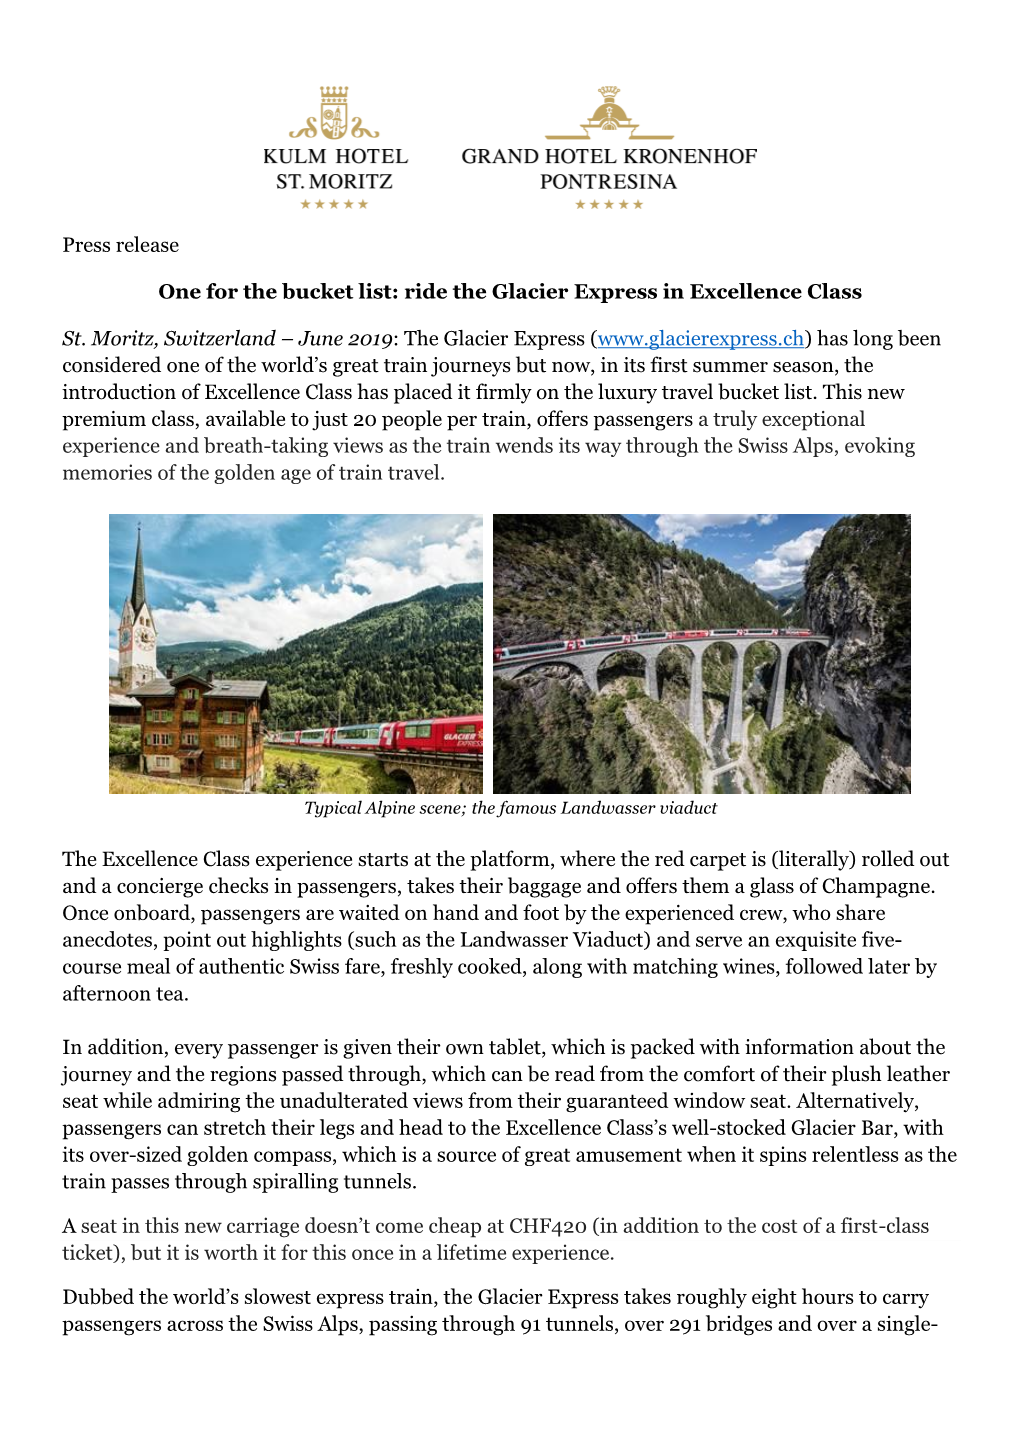 Ride the Glacier Express in Excellence Class